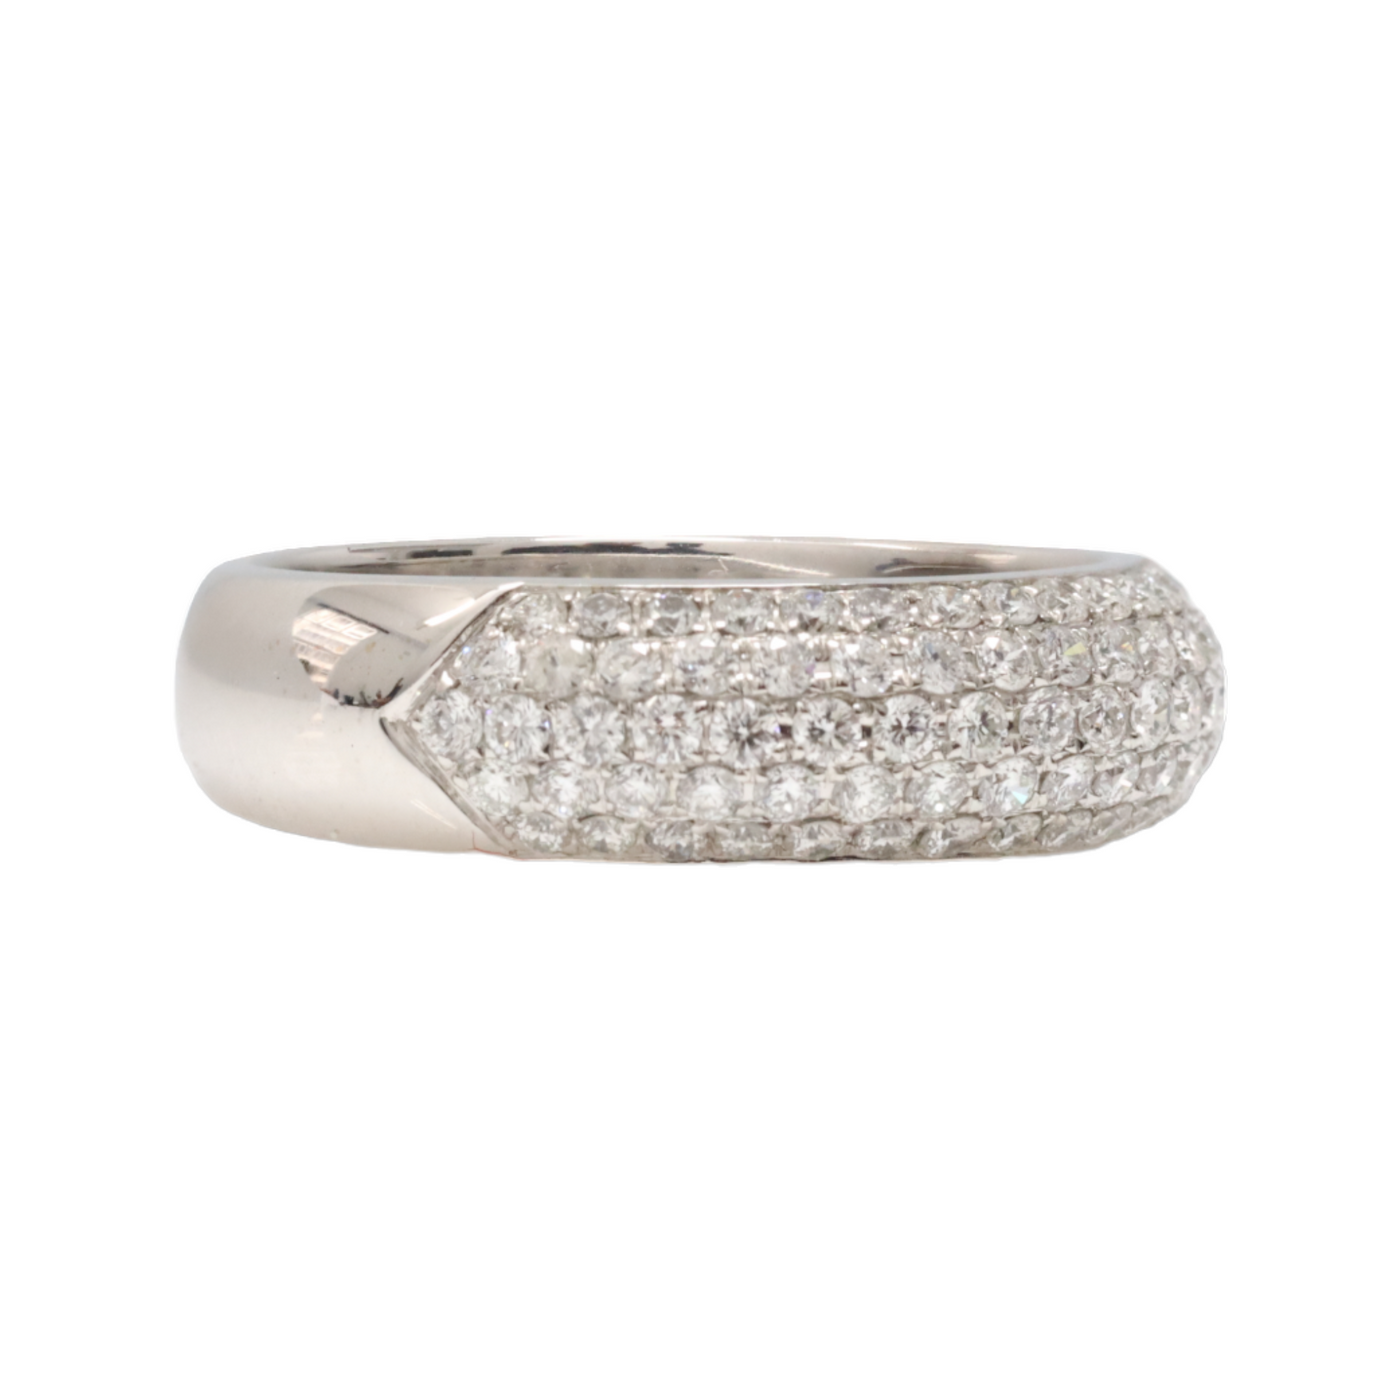 18ct White Gold Diamond Pave Dome Ring